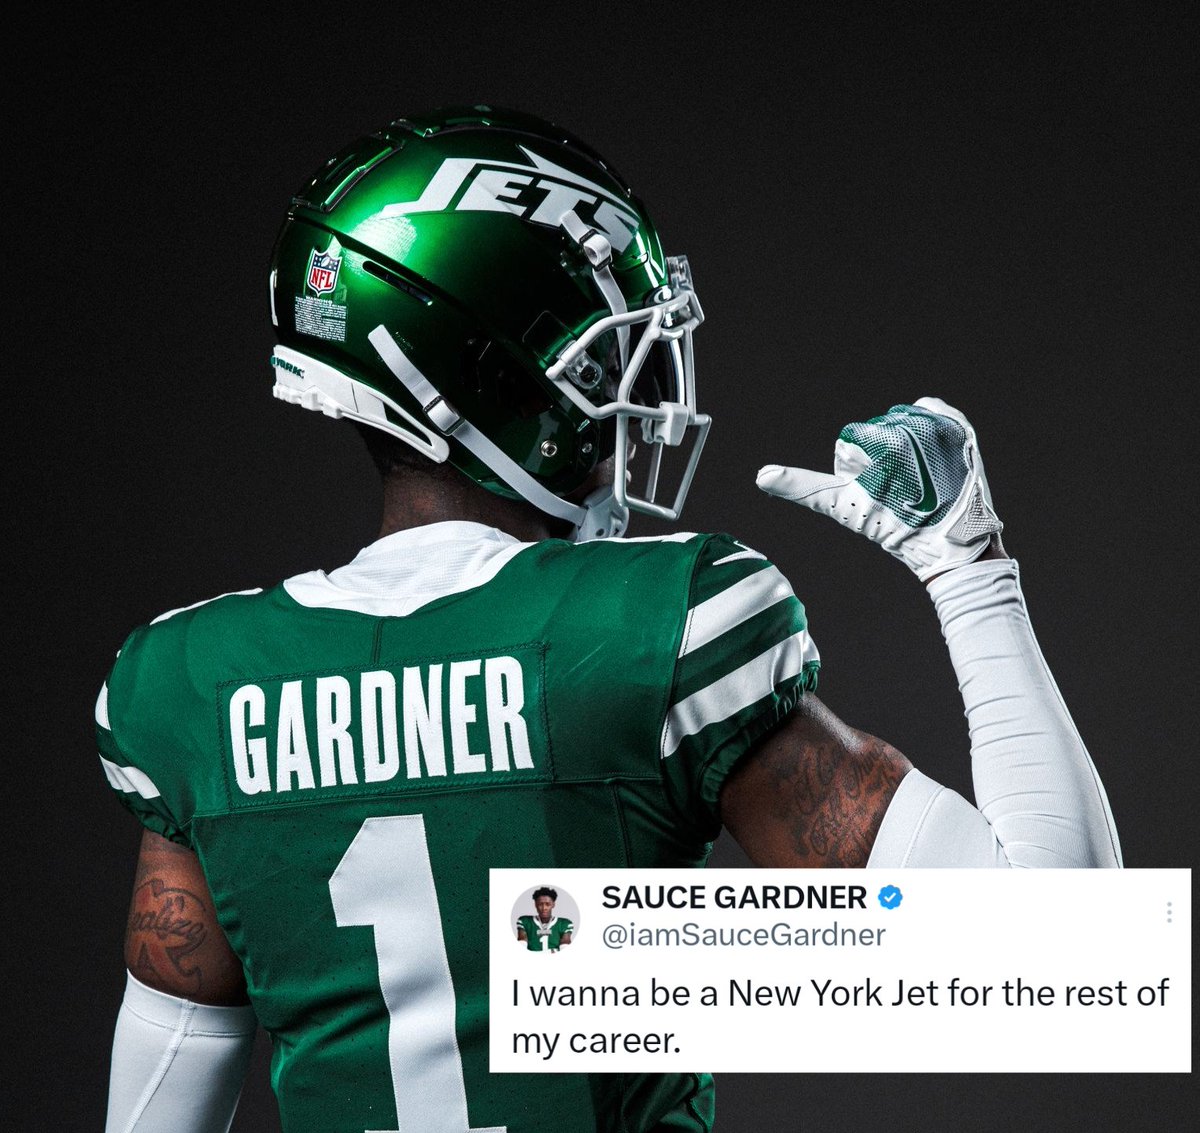 Sauce Gardner: 'I wanna be a New York Jet for the rest of my career.' 🥹

#Jets